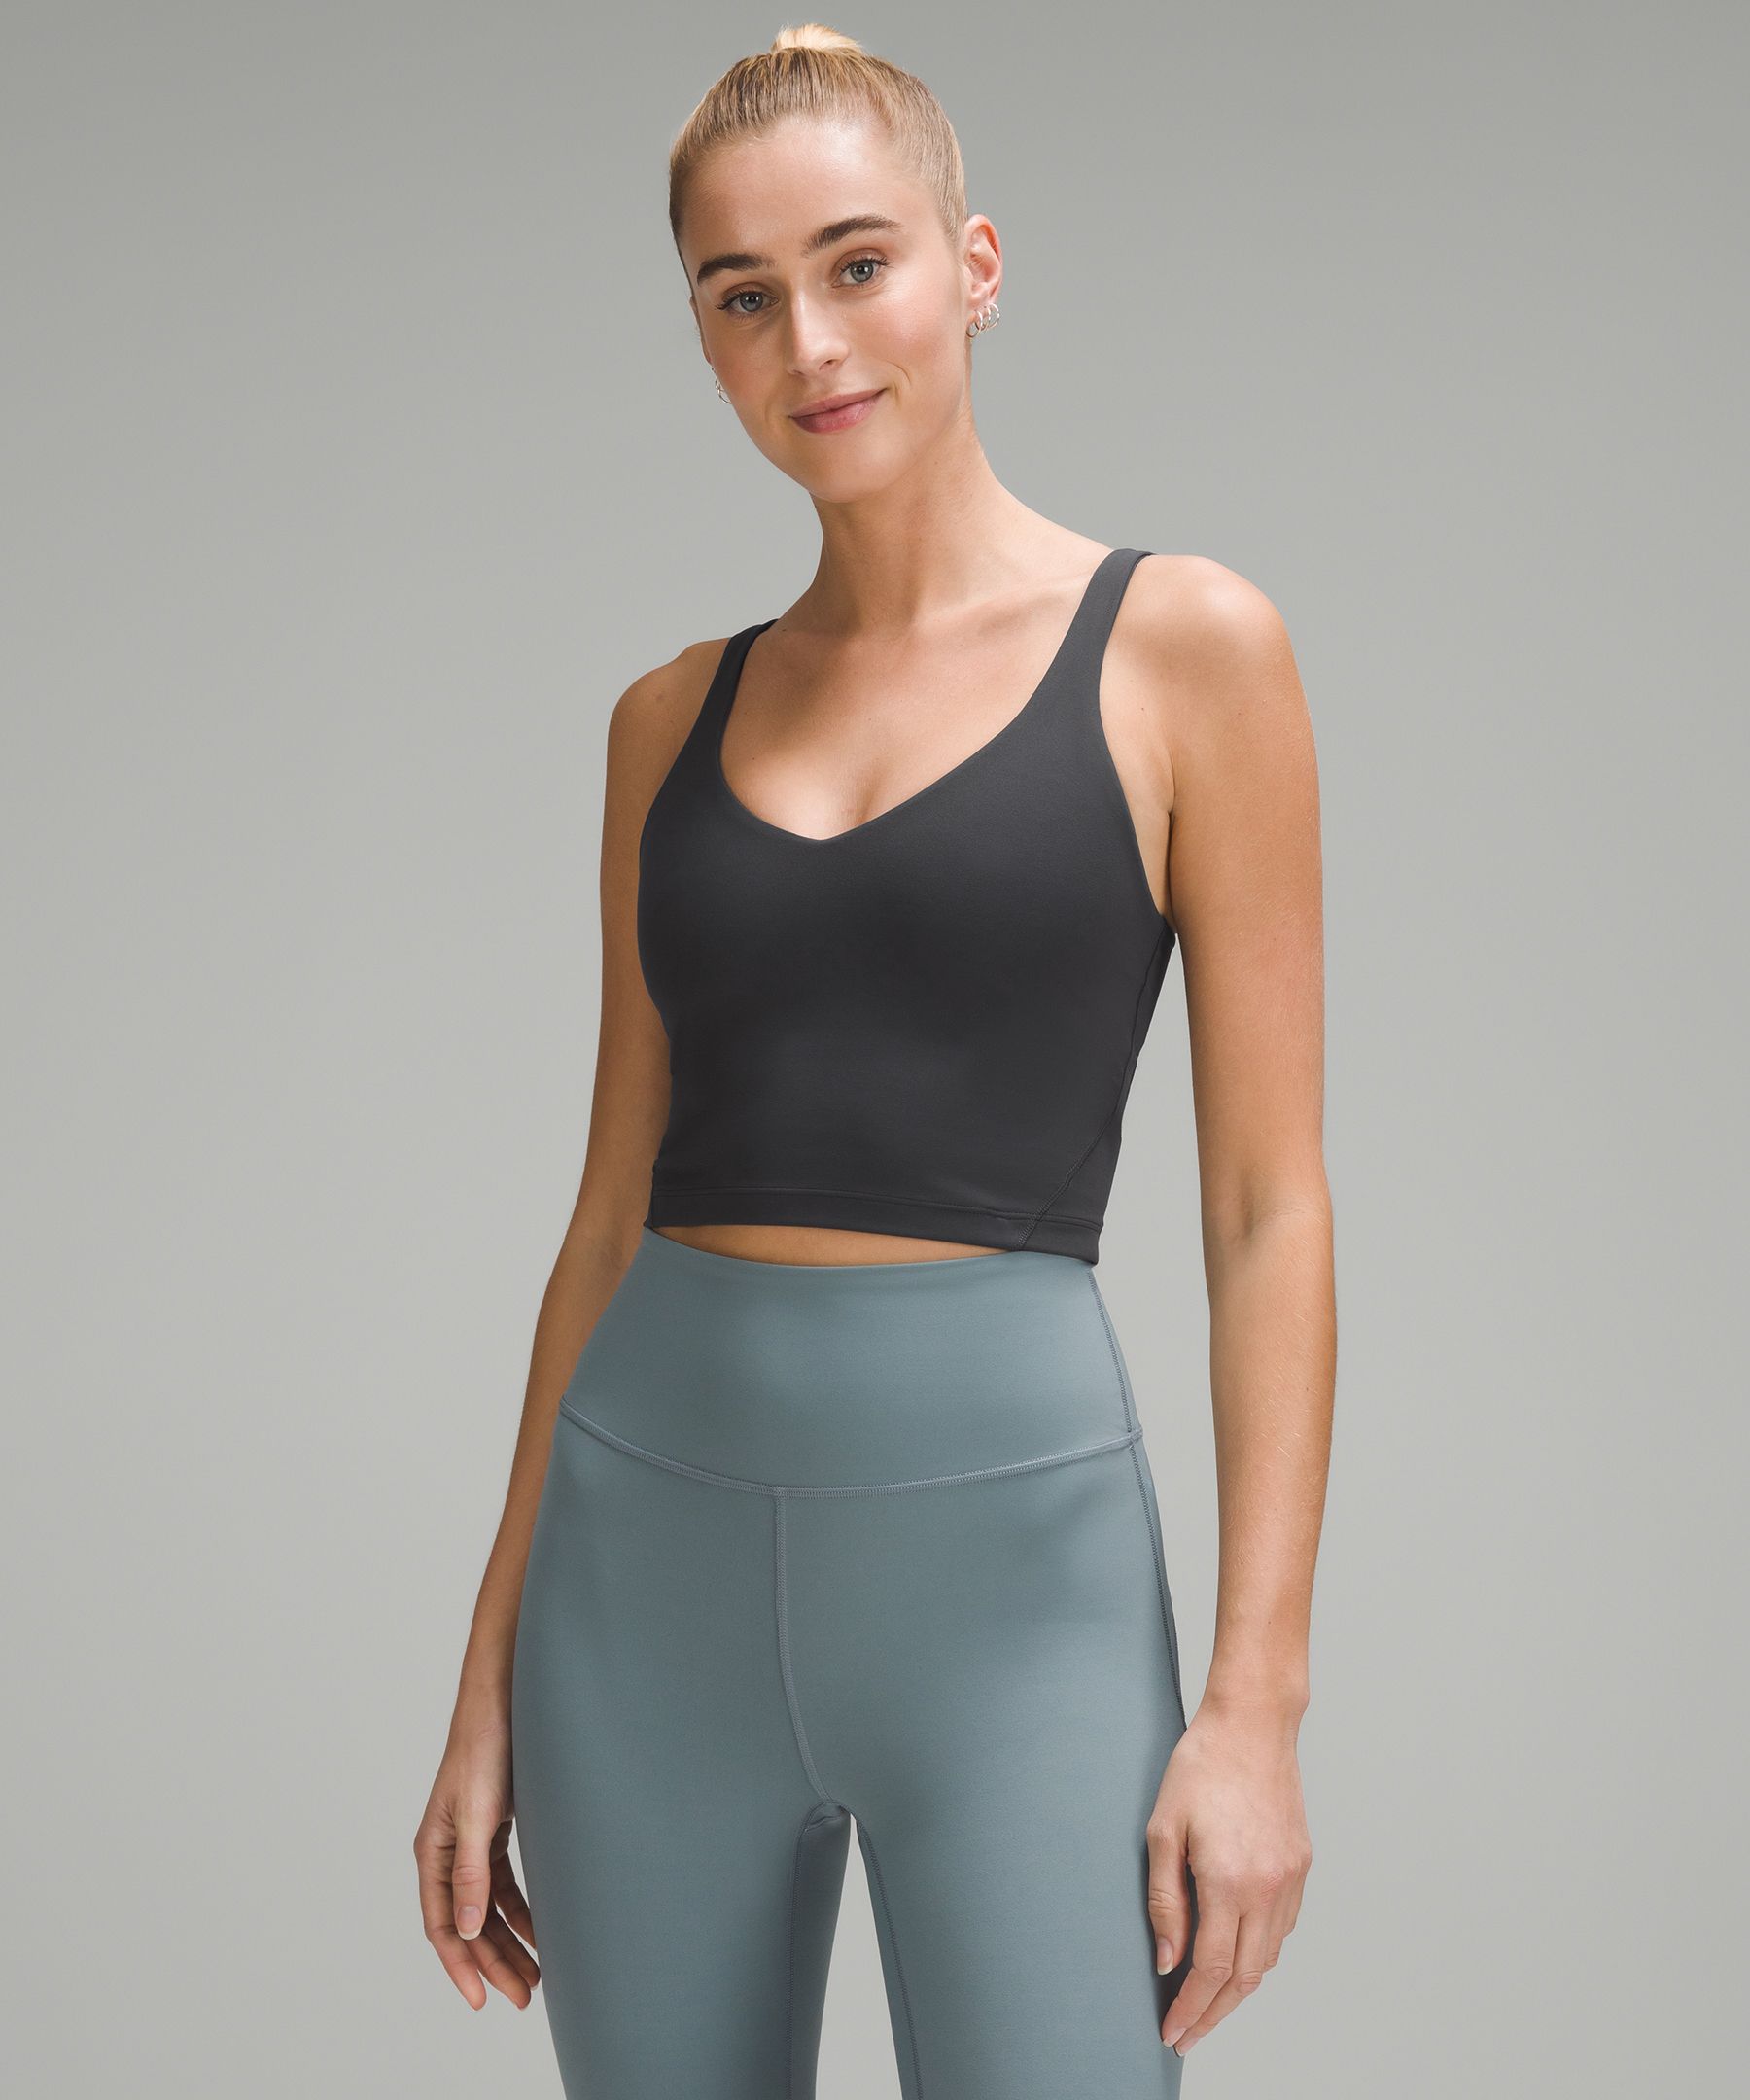 Buyandship Recommends: Bestselling Lululemon Apparel From Canada